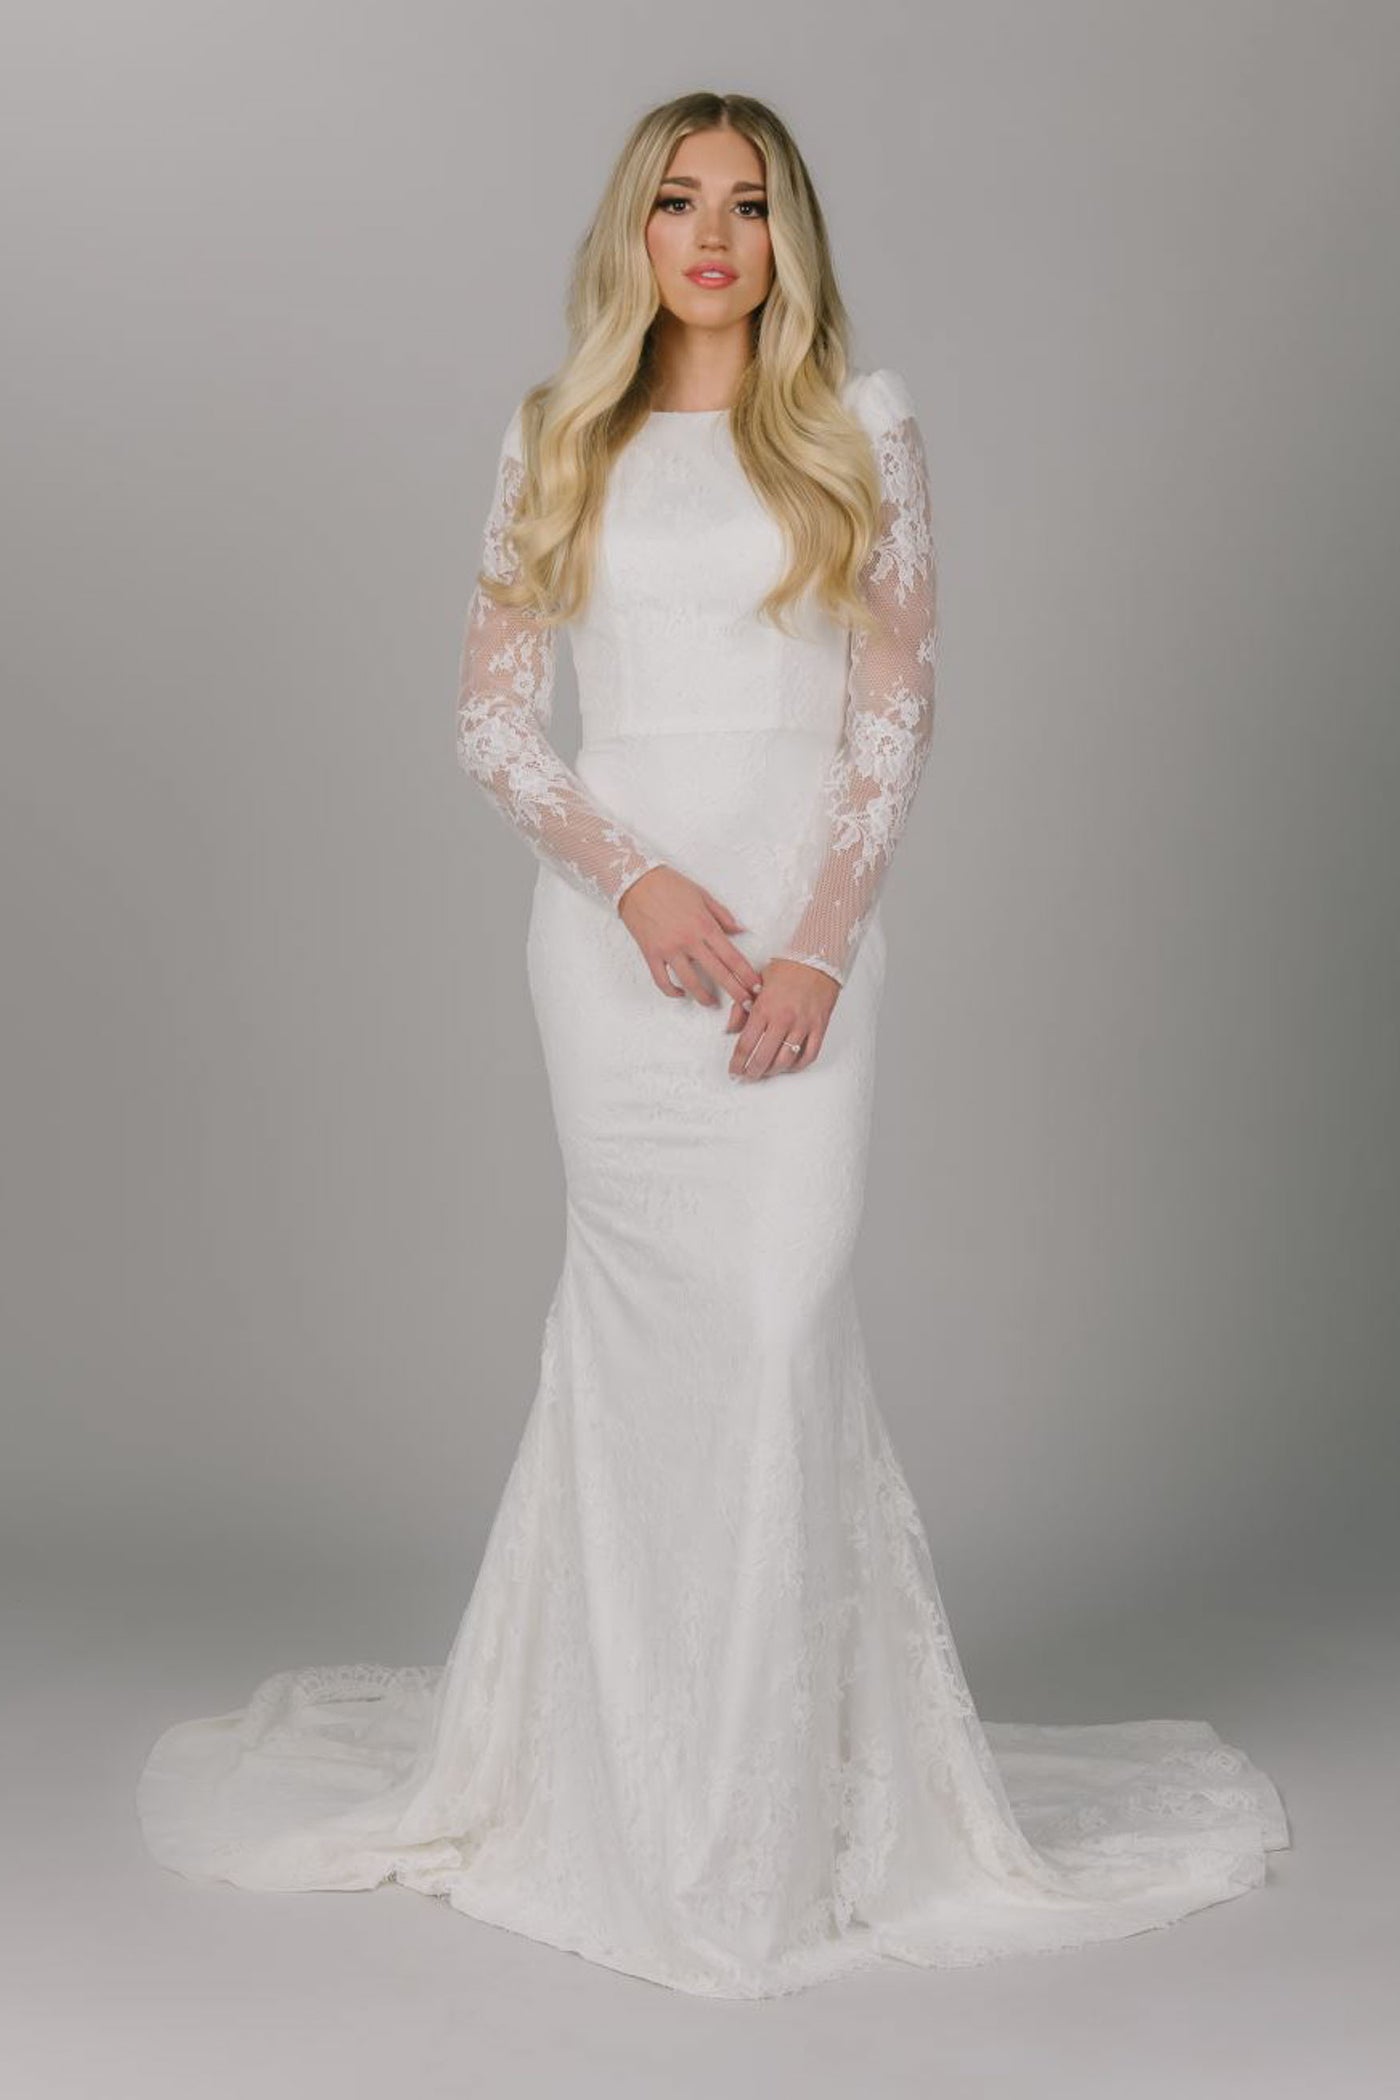 This is a blonde model modeling a modest wedding dress with full lace. It is long sleeved with a boat neckline and fitted silhouette.